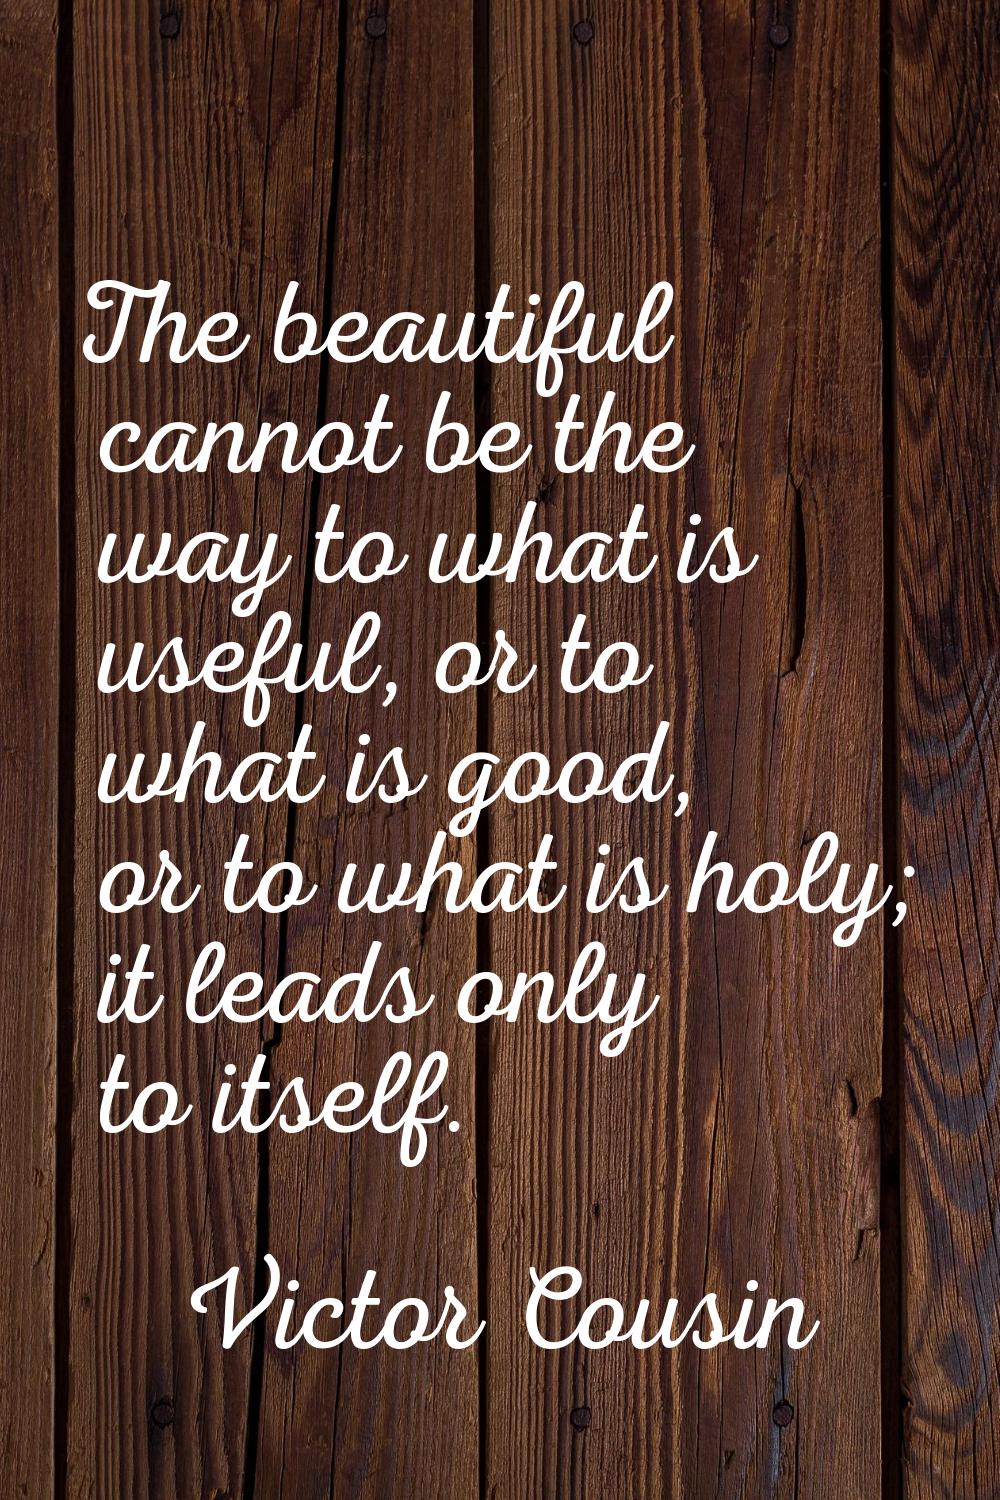 The beautiful cannot be the way to what is useful, or to what is good, or to what is holy; it leads